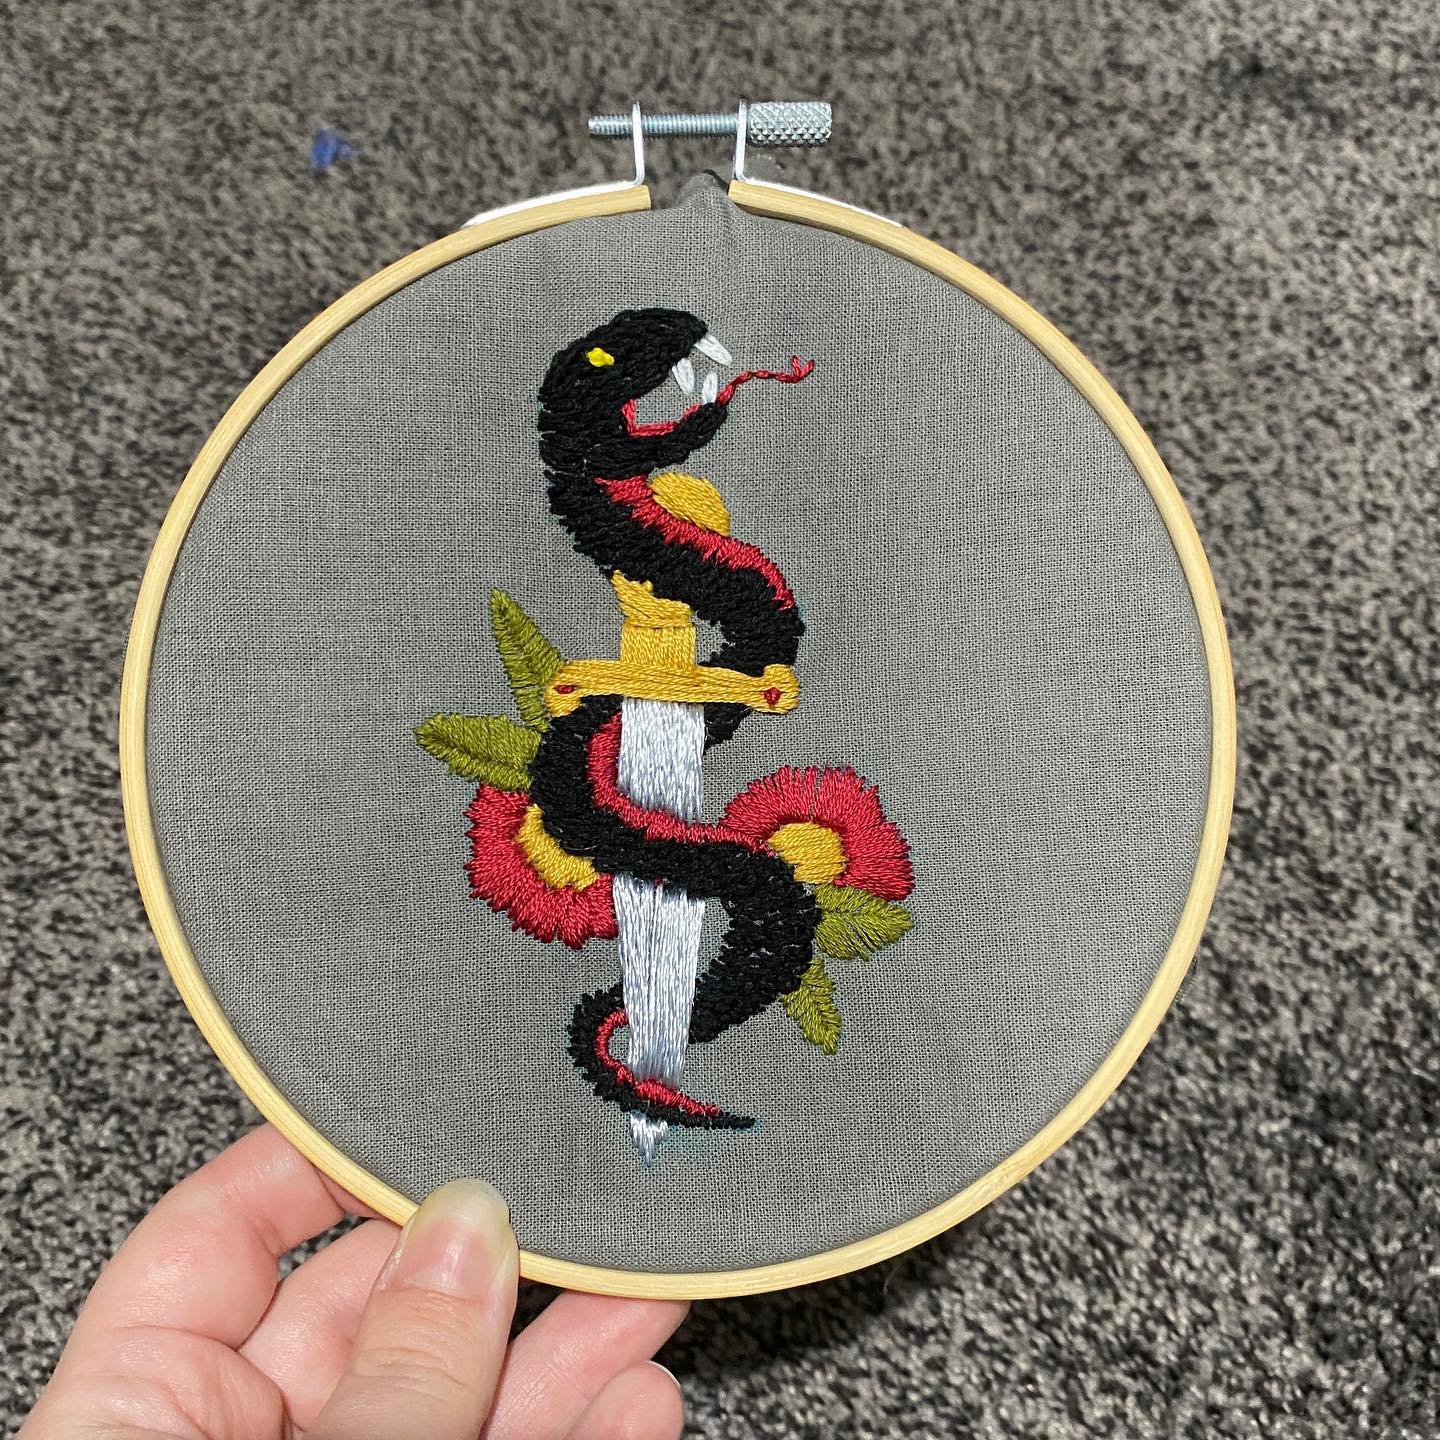 Embroidery of a snake wrapped around a sword with flowers.